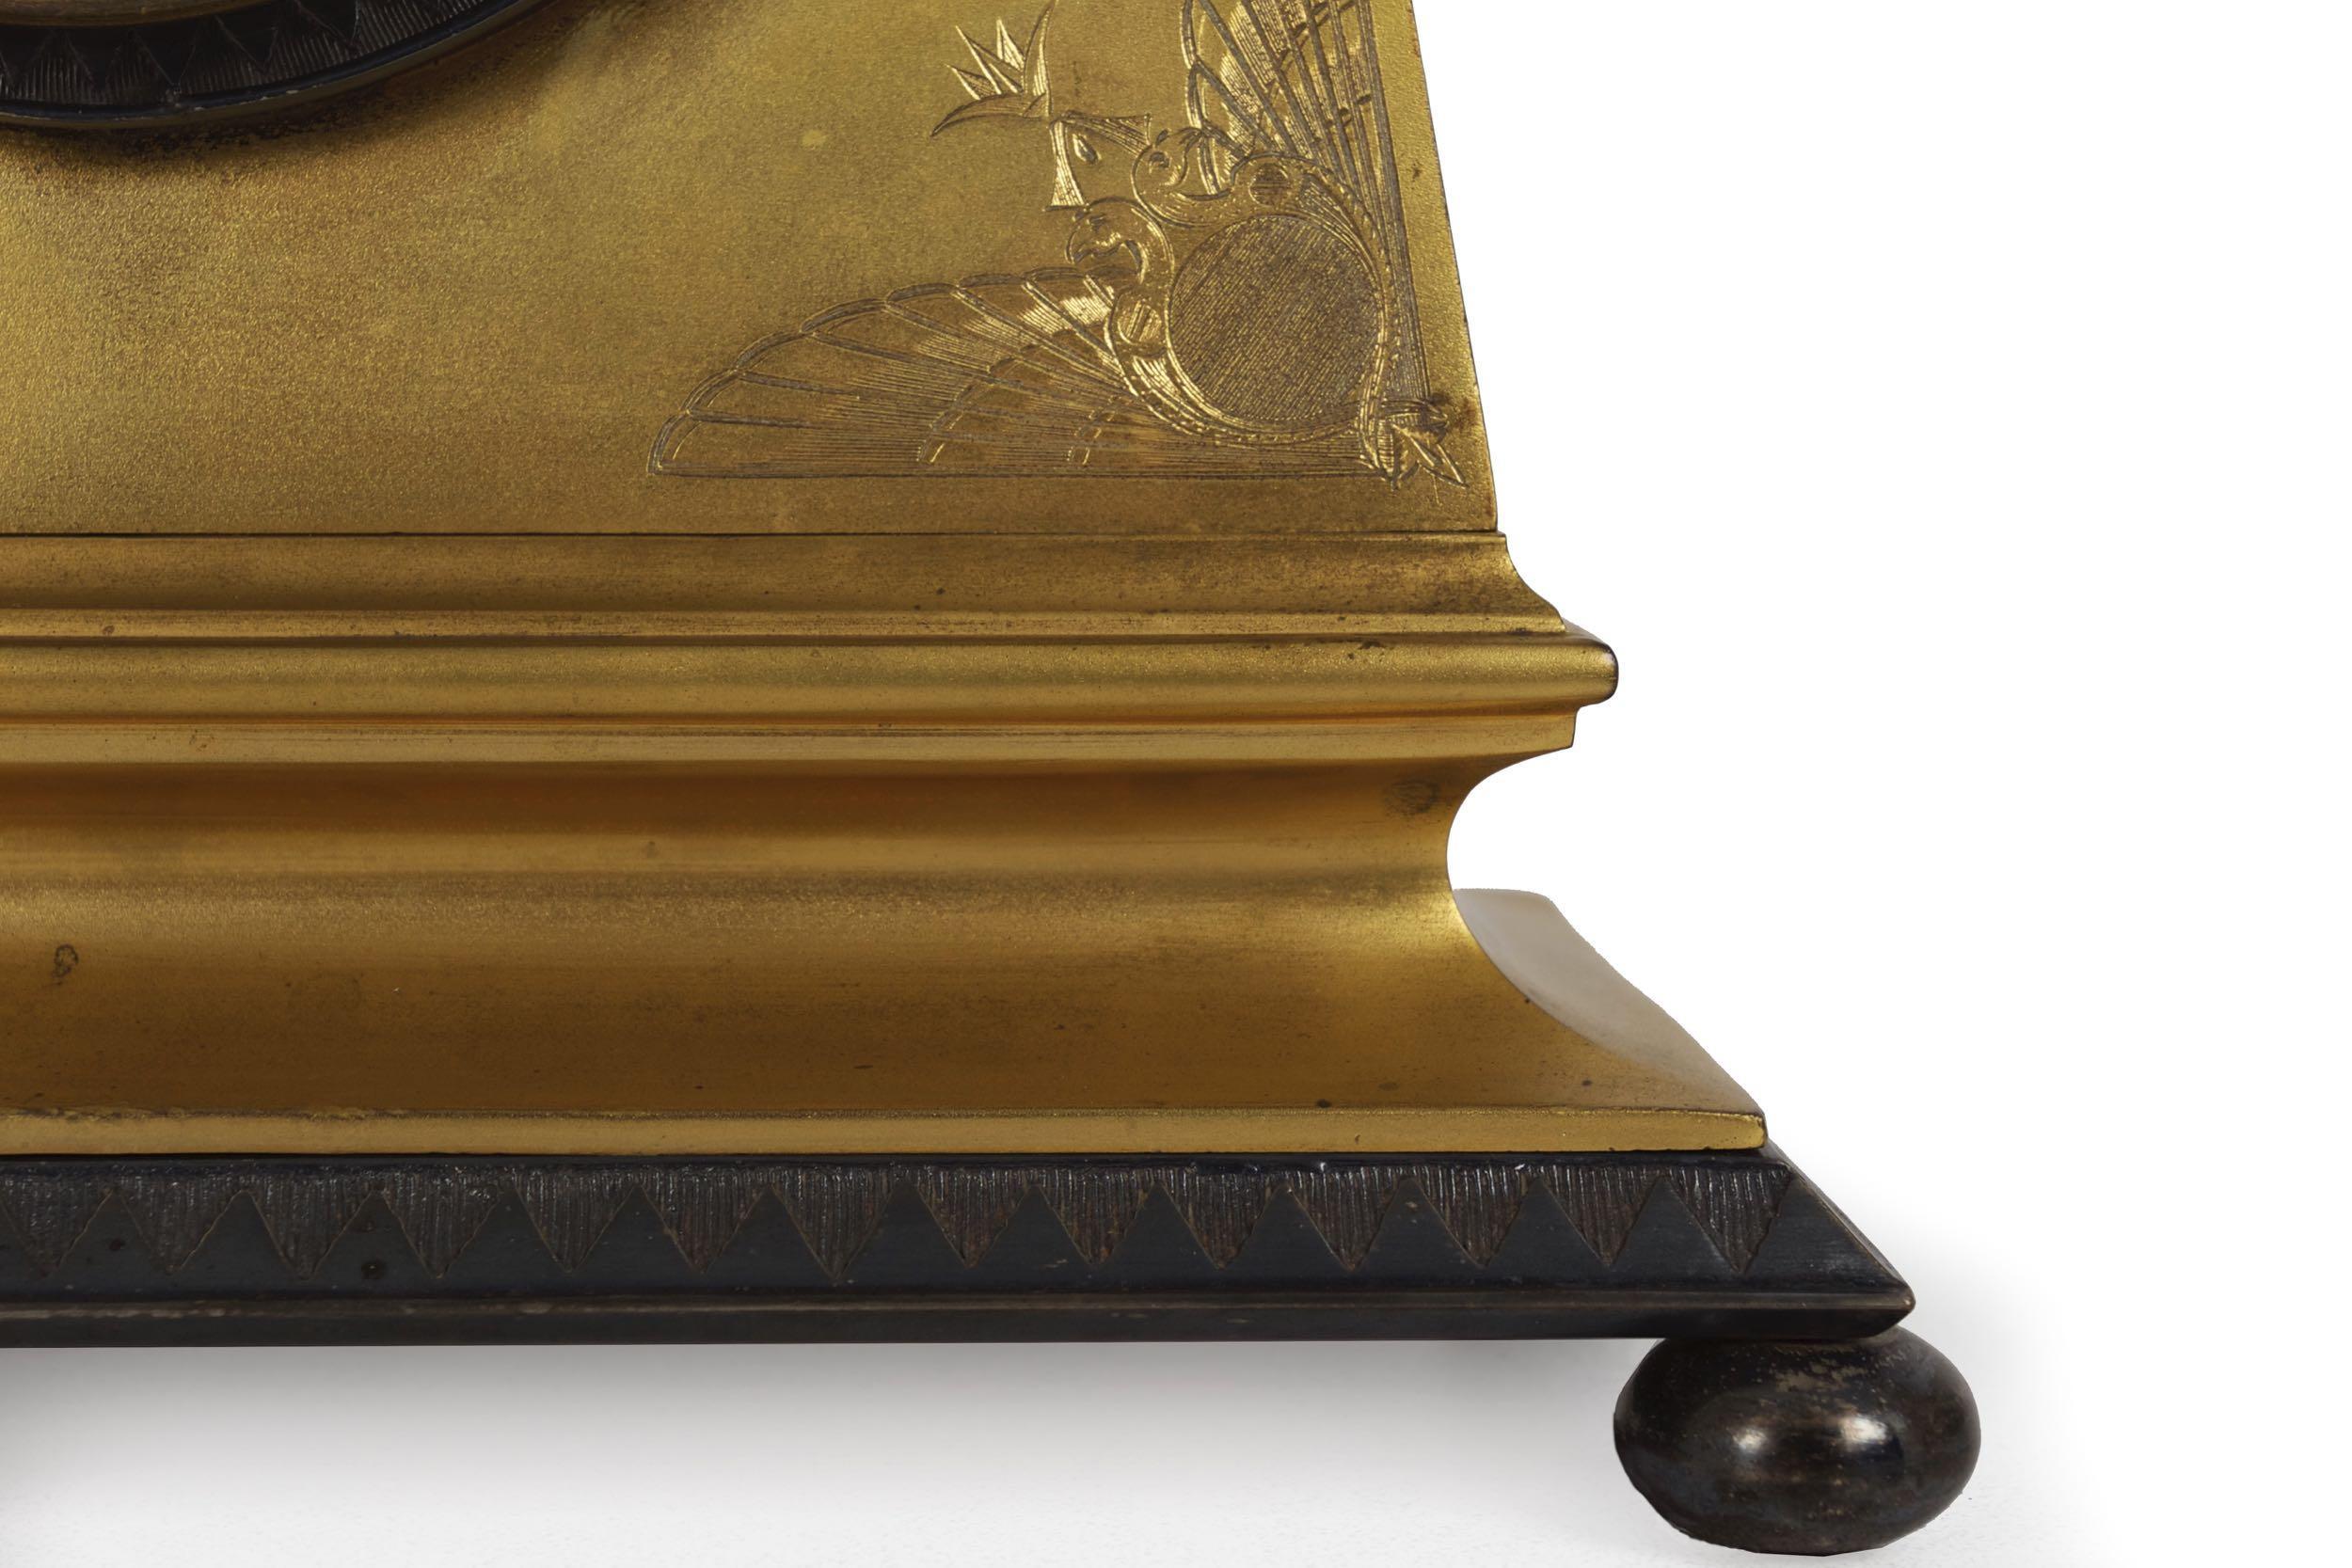 French Egyptian Revival Antique Bronze Mantel Clock with Sphinx, circa 1890 4